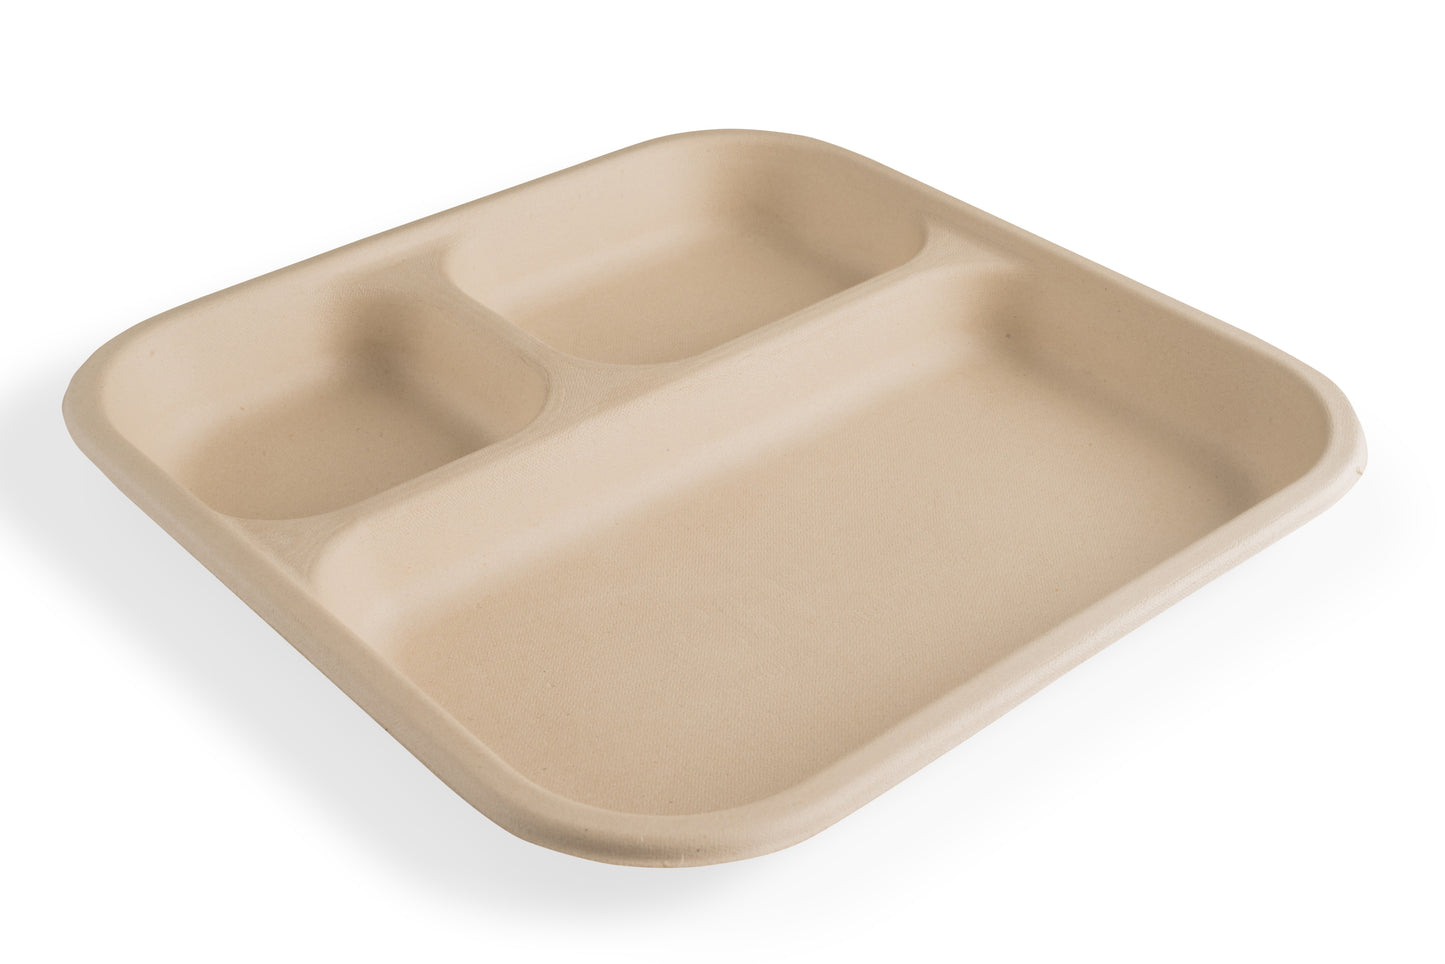 3 Compartment Meal Tray